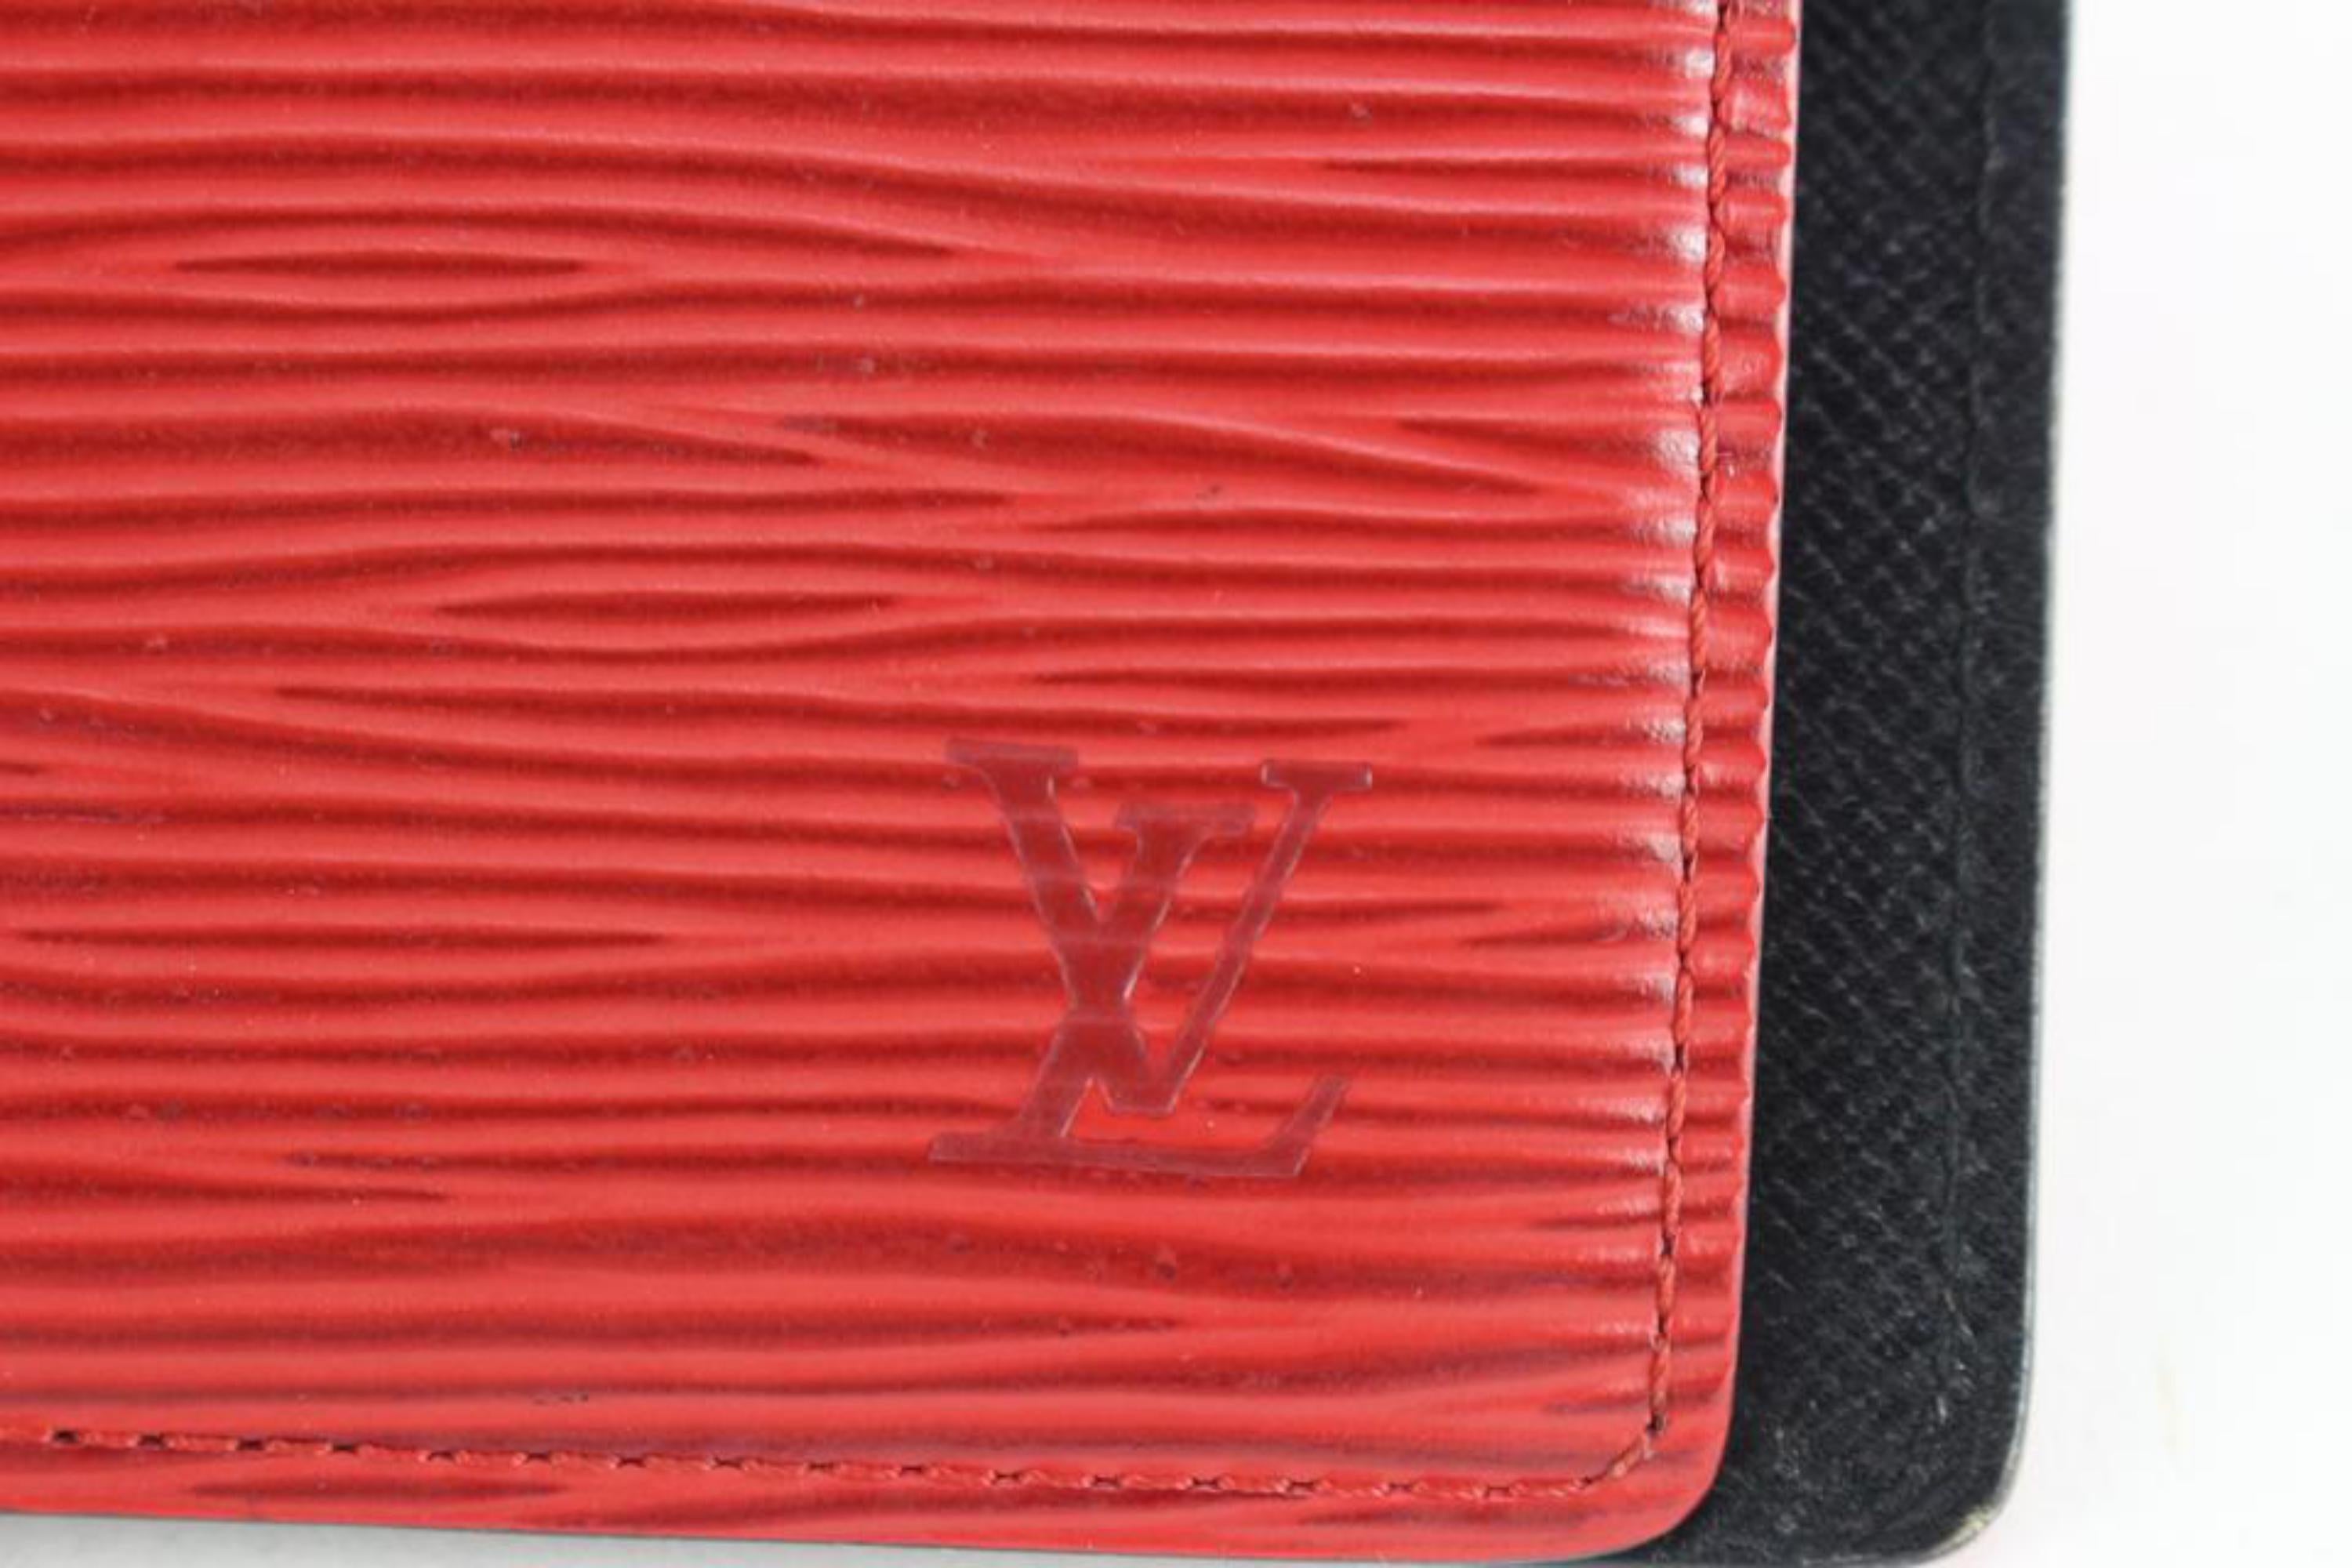 Louis Vuitton Epi Leather Small Ring Agenda Cover - Red Books